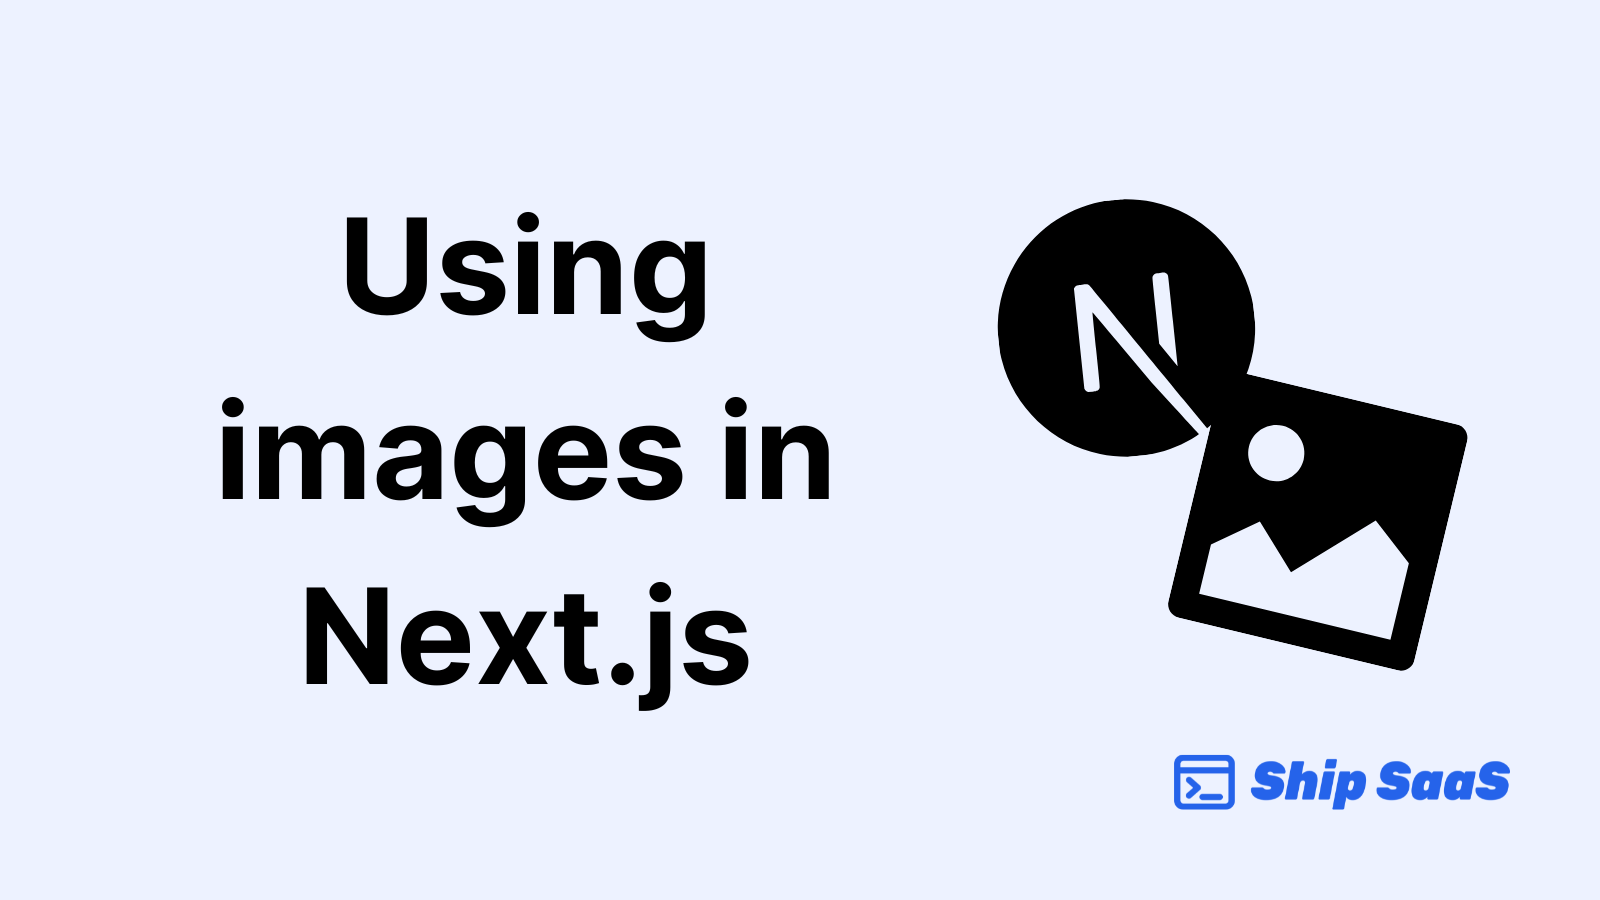 Guide to using images in Next.js